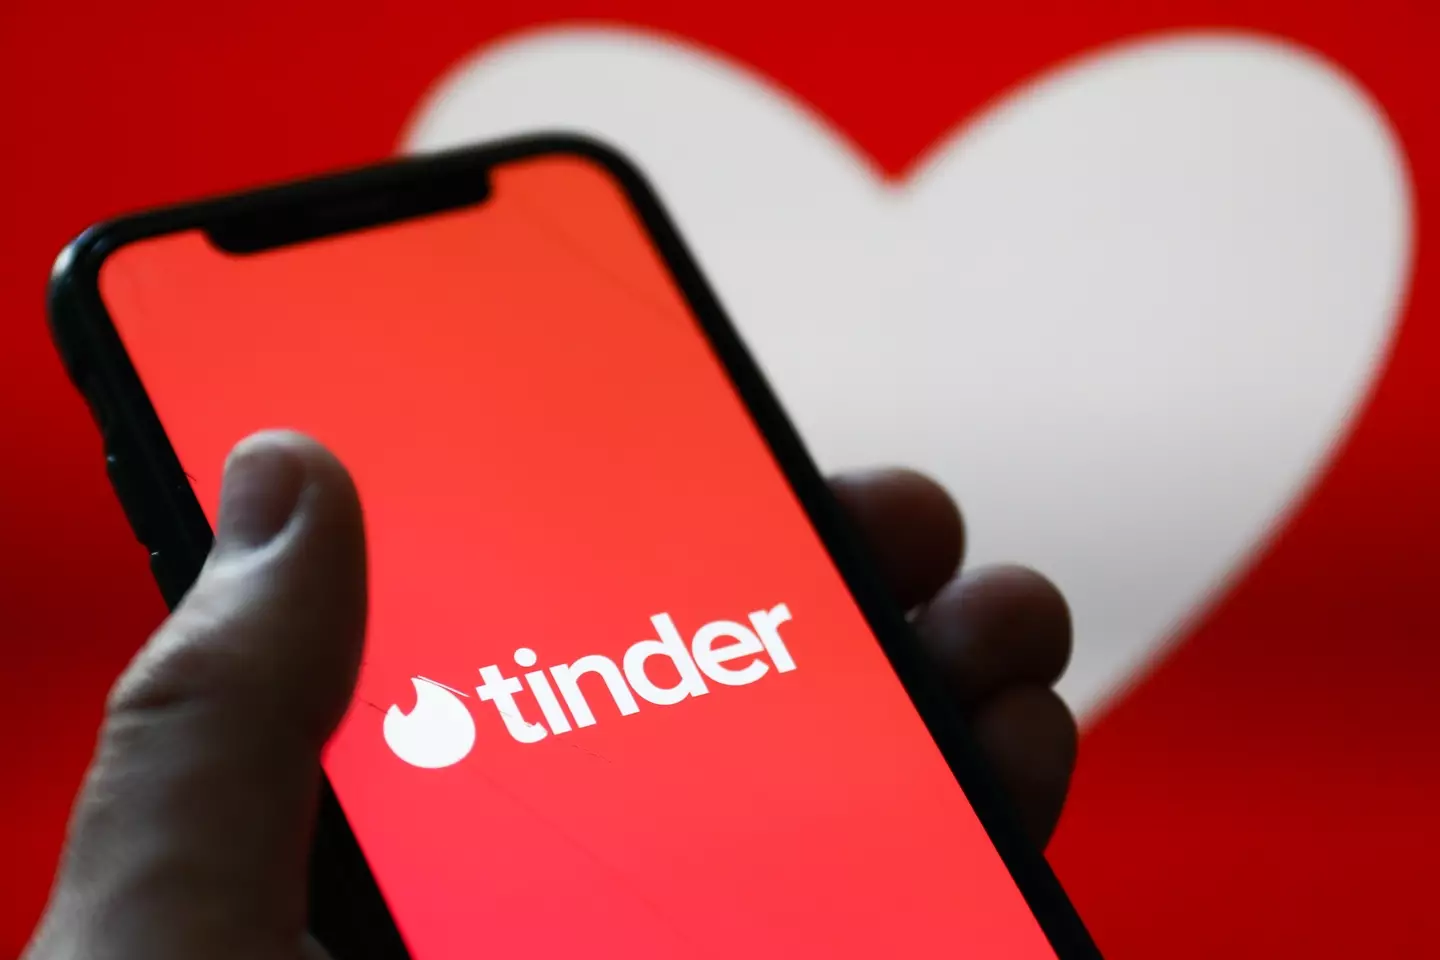 Tinder has been one of the most popular and notorious dating apps in the last decade.